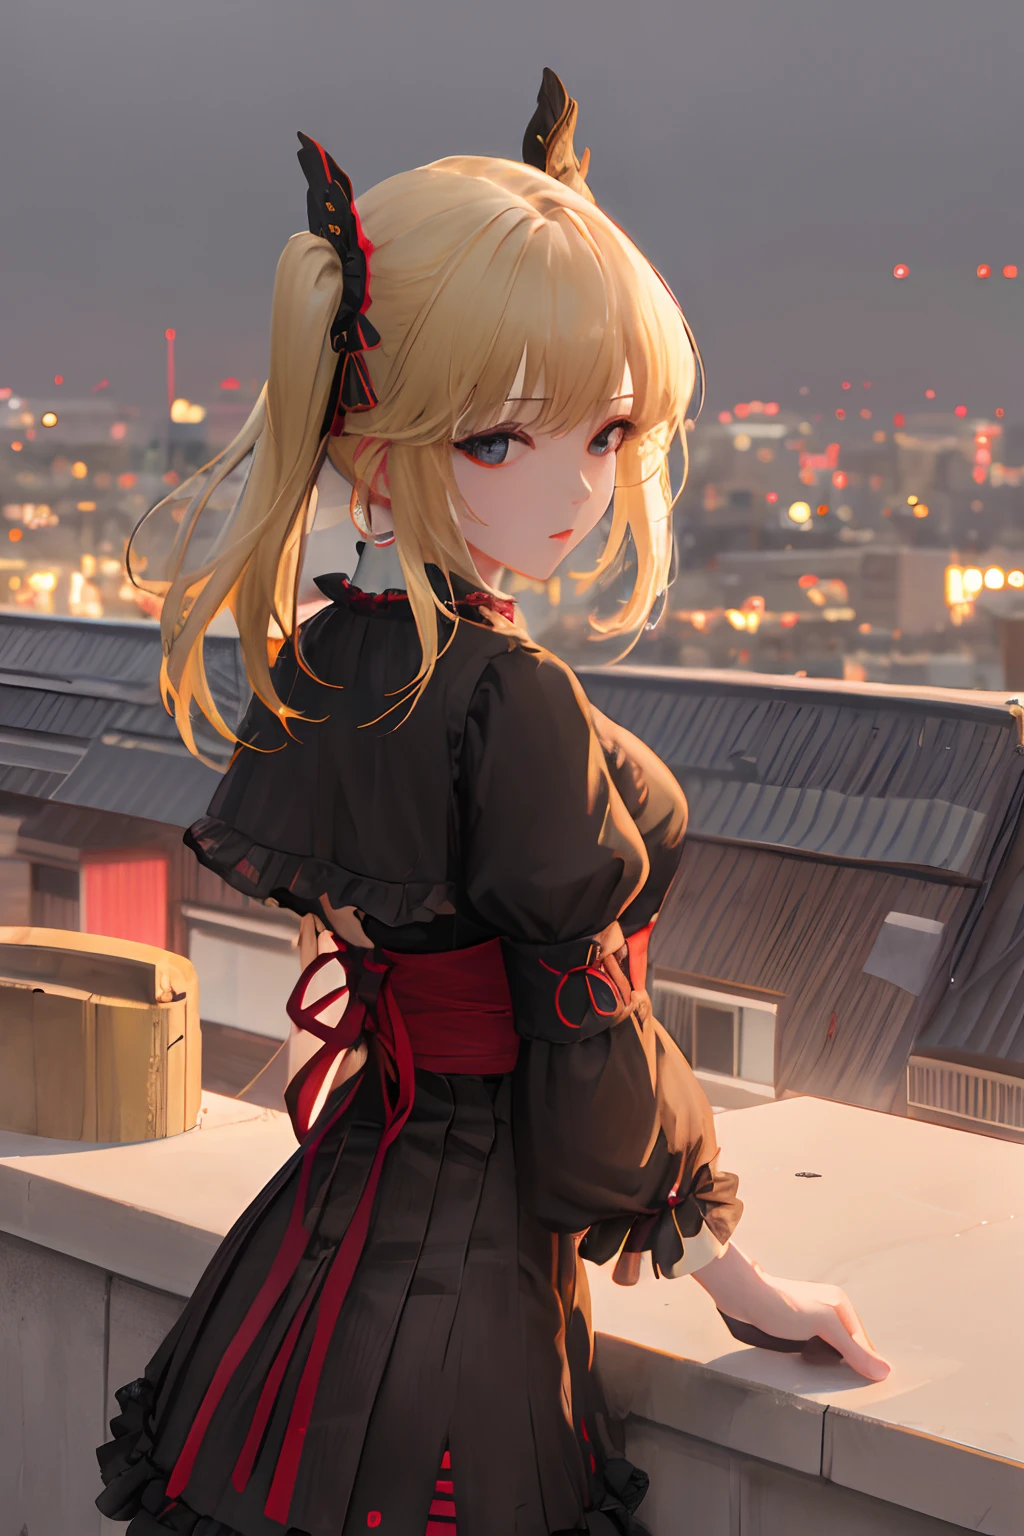 G-Wise Style, 1womanl,20yr old、 Solo,On the roof of a building、 Assassin Wind、Gothic Lolita Fashion,Twin-tailed、 full body Esbian, (long_Focus:1.2),Cityscape, nigh sky, Blurry background, depth of fields, Bokeh, Cinema Lighting, Dark theme, Sateen, Film grain, nffsw、(8K、Raw photography、top-quality、​masterpiece:1.2)、(realisitic、photoRealstic:1.3)、nffsw、Depth of field is deep、Wide light、highcontrast、(light glow:1.4)、chromatic abberation、foco nítido、RAW color photo、Film Still、lighting like a movie、8K resolution、